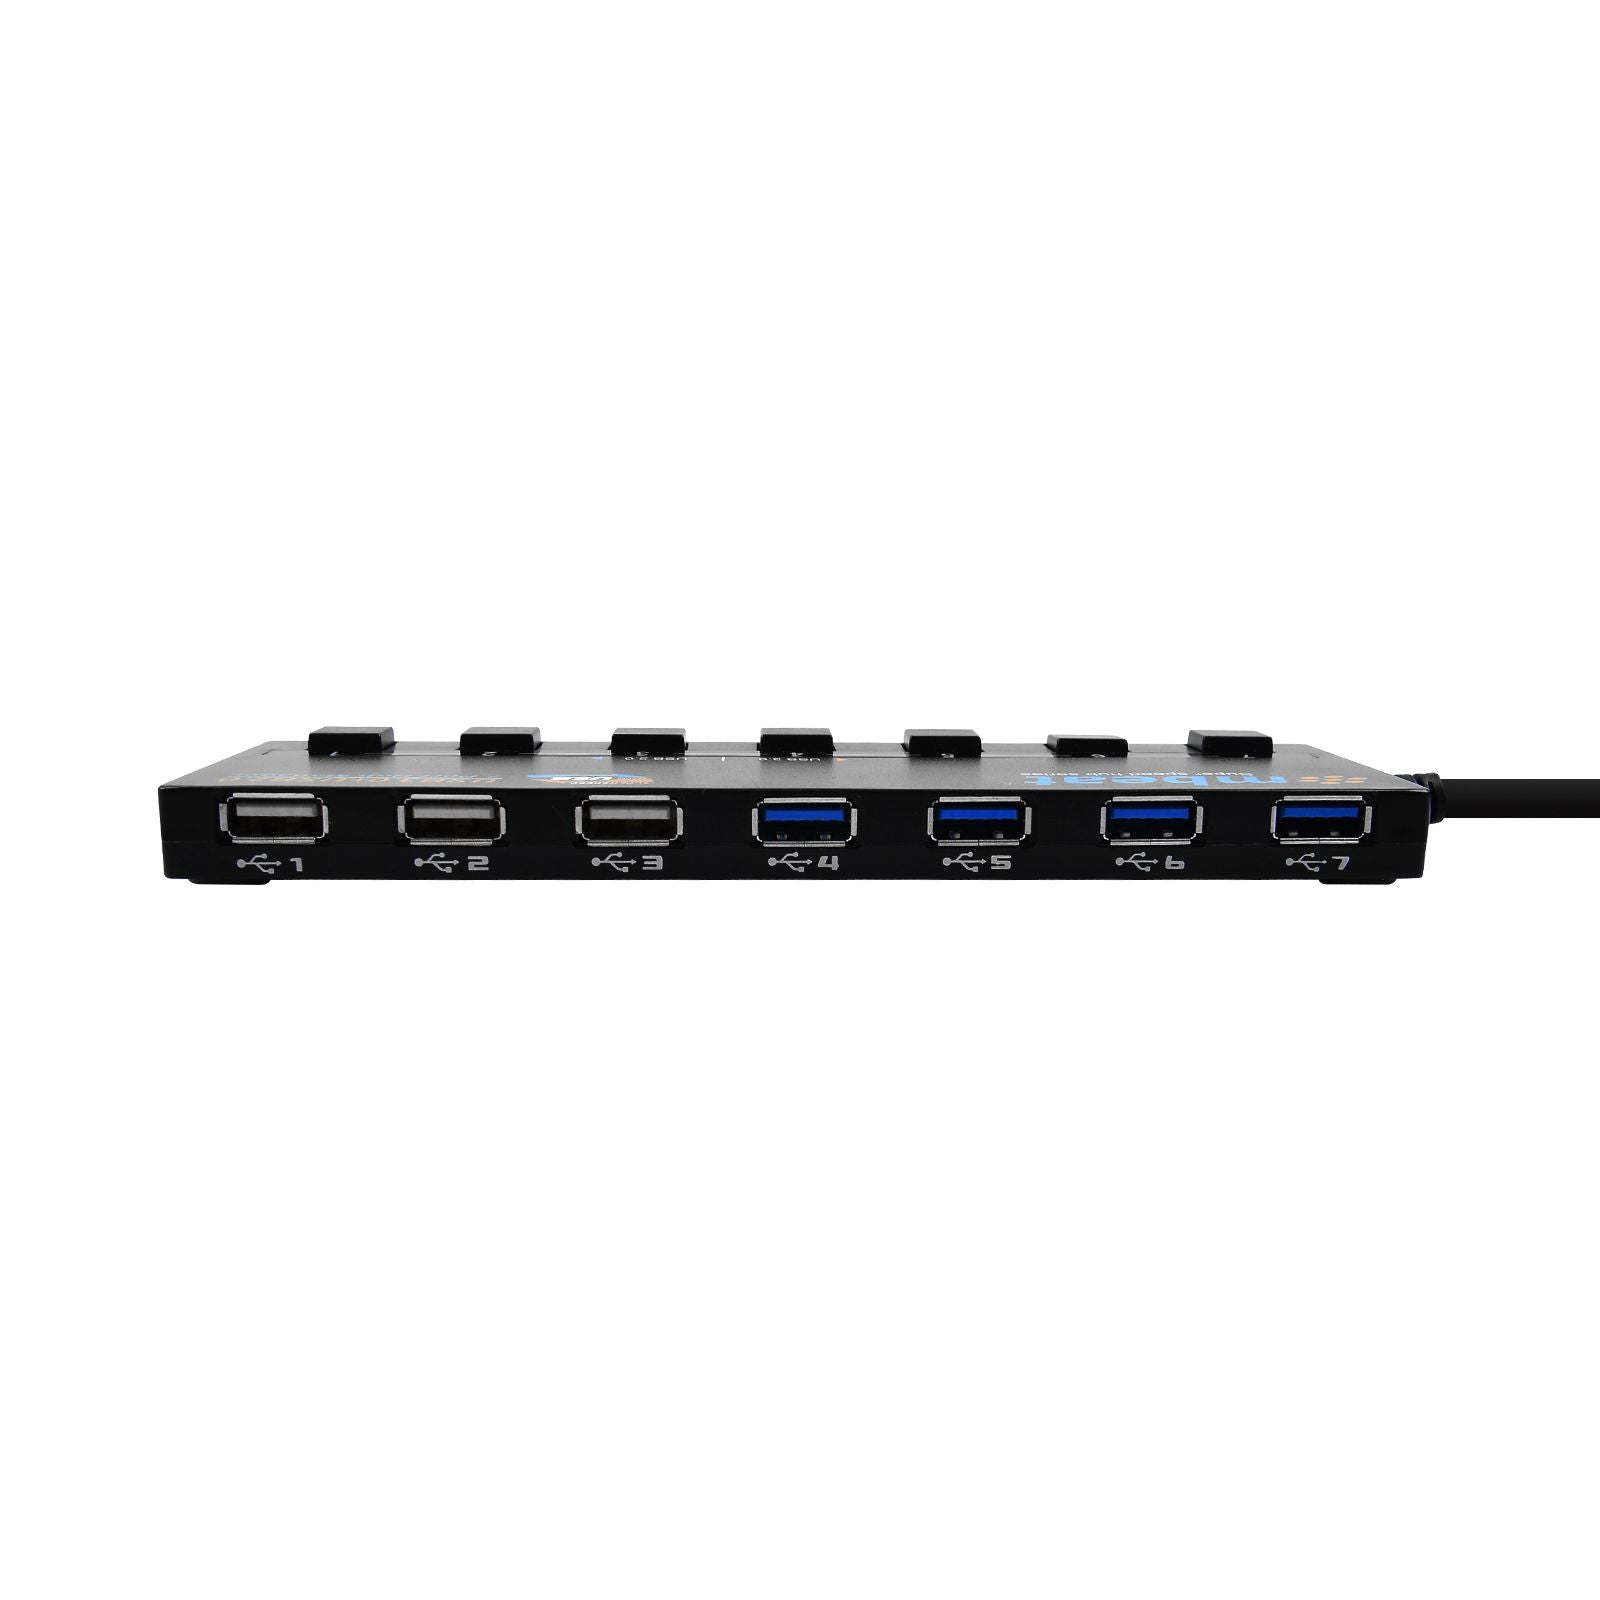 mbeat 7-Port USB 3.0 and USB 2.0 Hub Manager With Switches